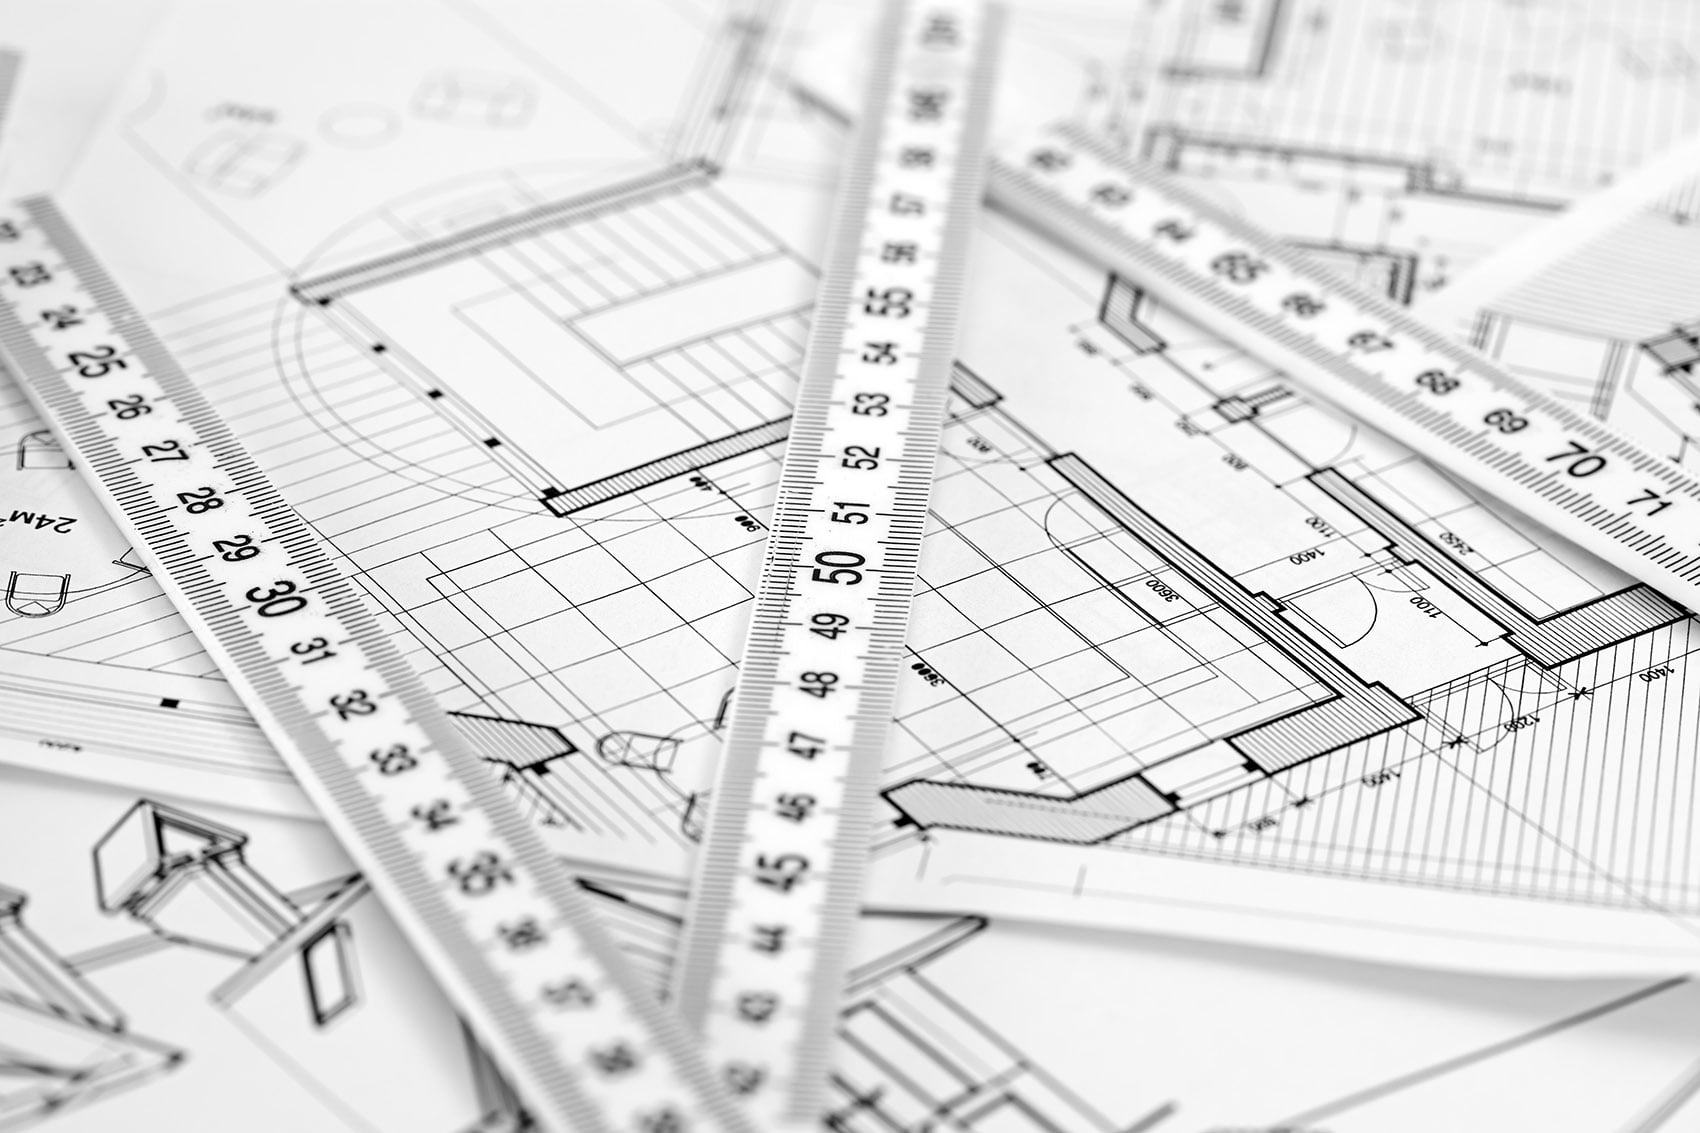 Architectural drafting tools and drawings | Featured image for the Architectural Drafting Service Page for Clements Clarke.